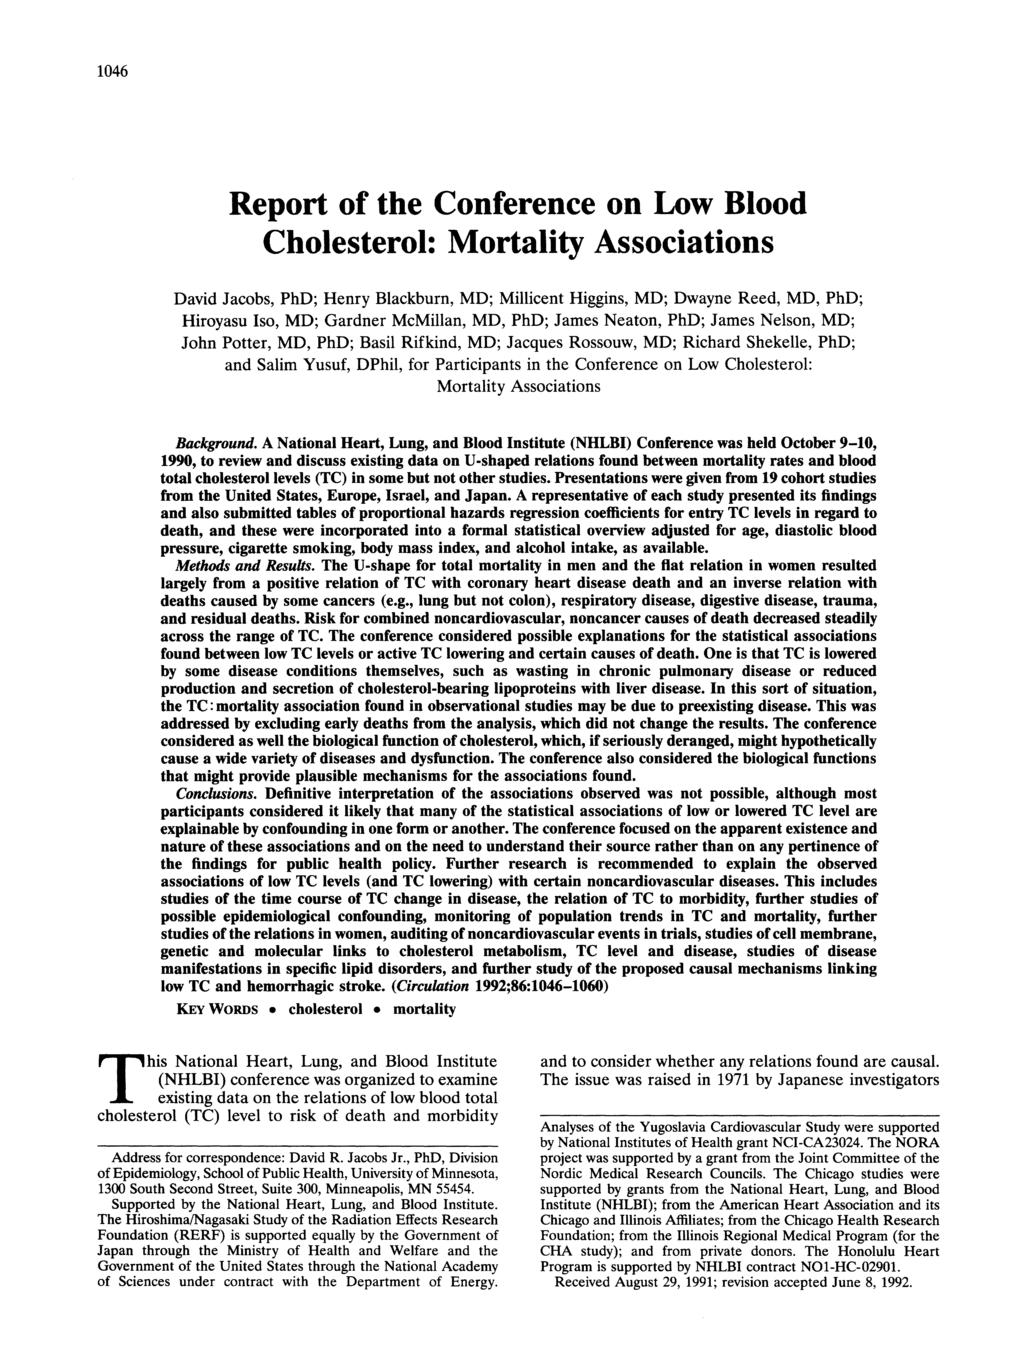 1046 Report of the Conference on Low Blood Cholesterol: Mortlity Associtions Dvid Jcobs, PhD; Henry Blckburn, MD; Millicent Higgins, MD; Dwyne Reed, MD, PhD; Hiroysu Iso, MD; Grdner McMilln, MD, PhD;